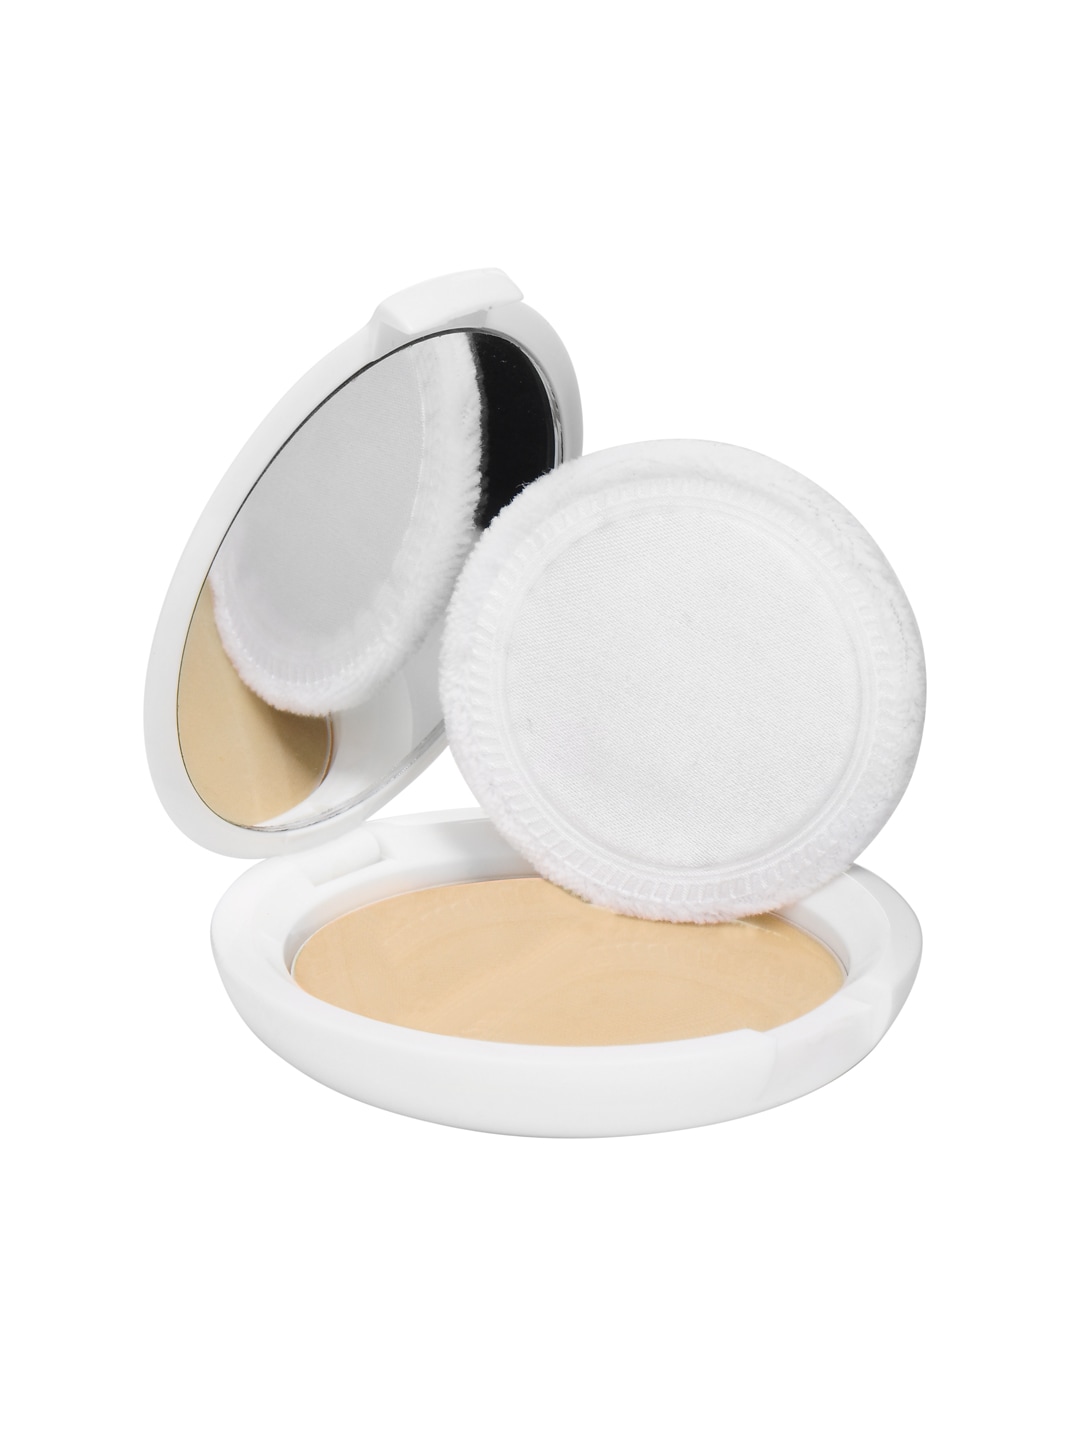 ColorBar Radiant White UV Fairness Just Beige Compact 004